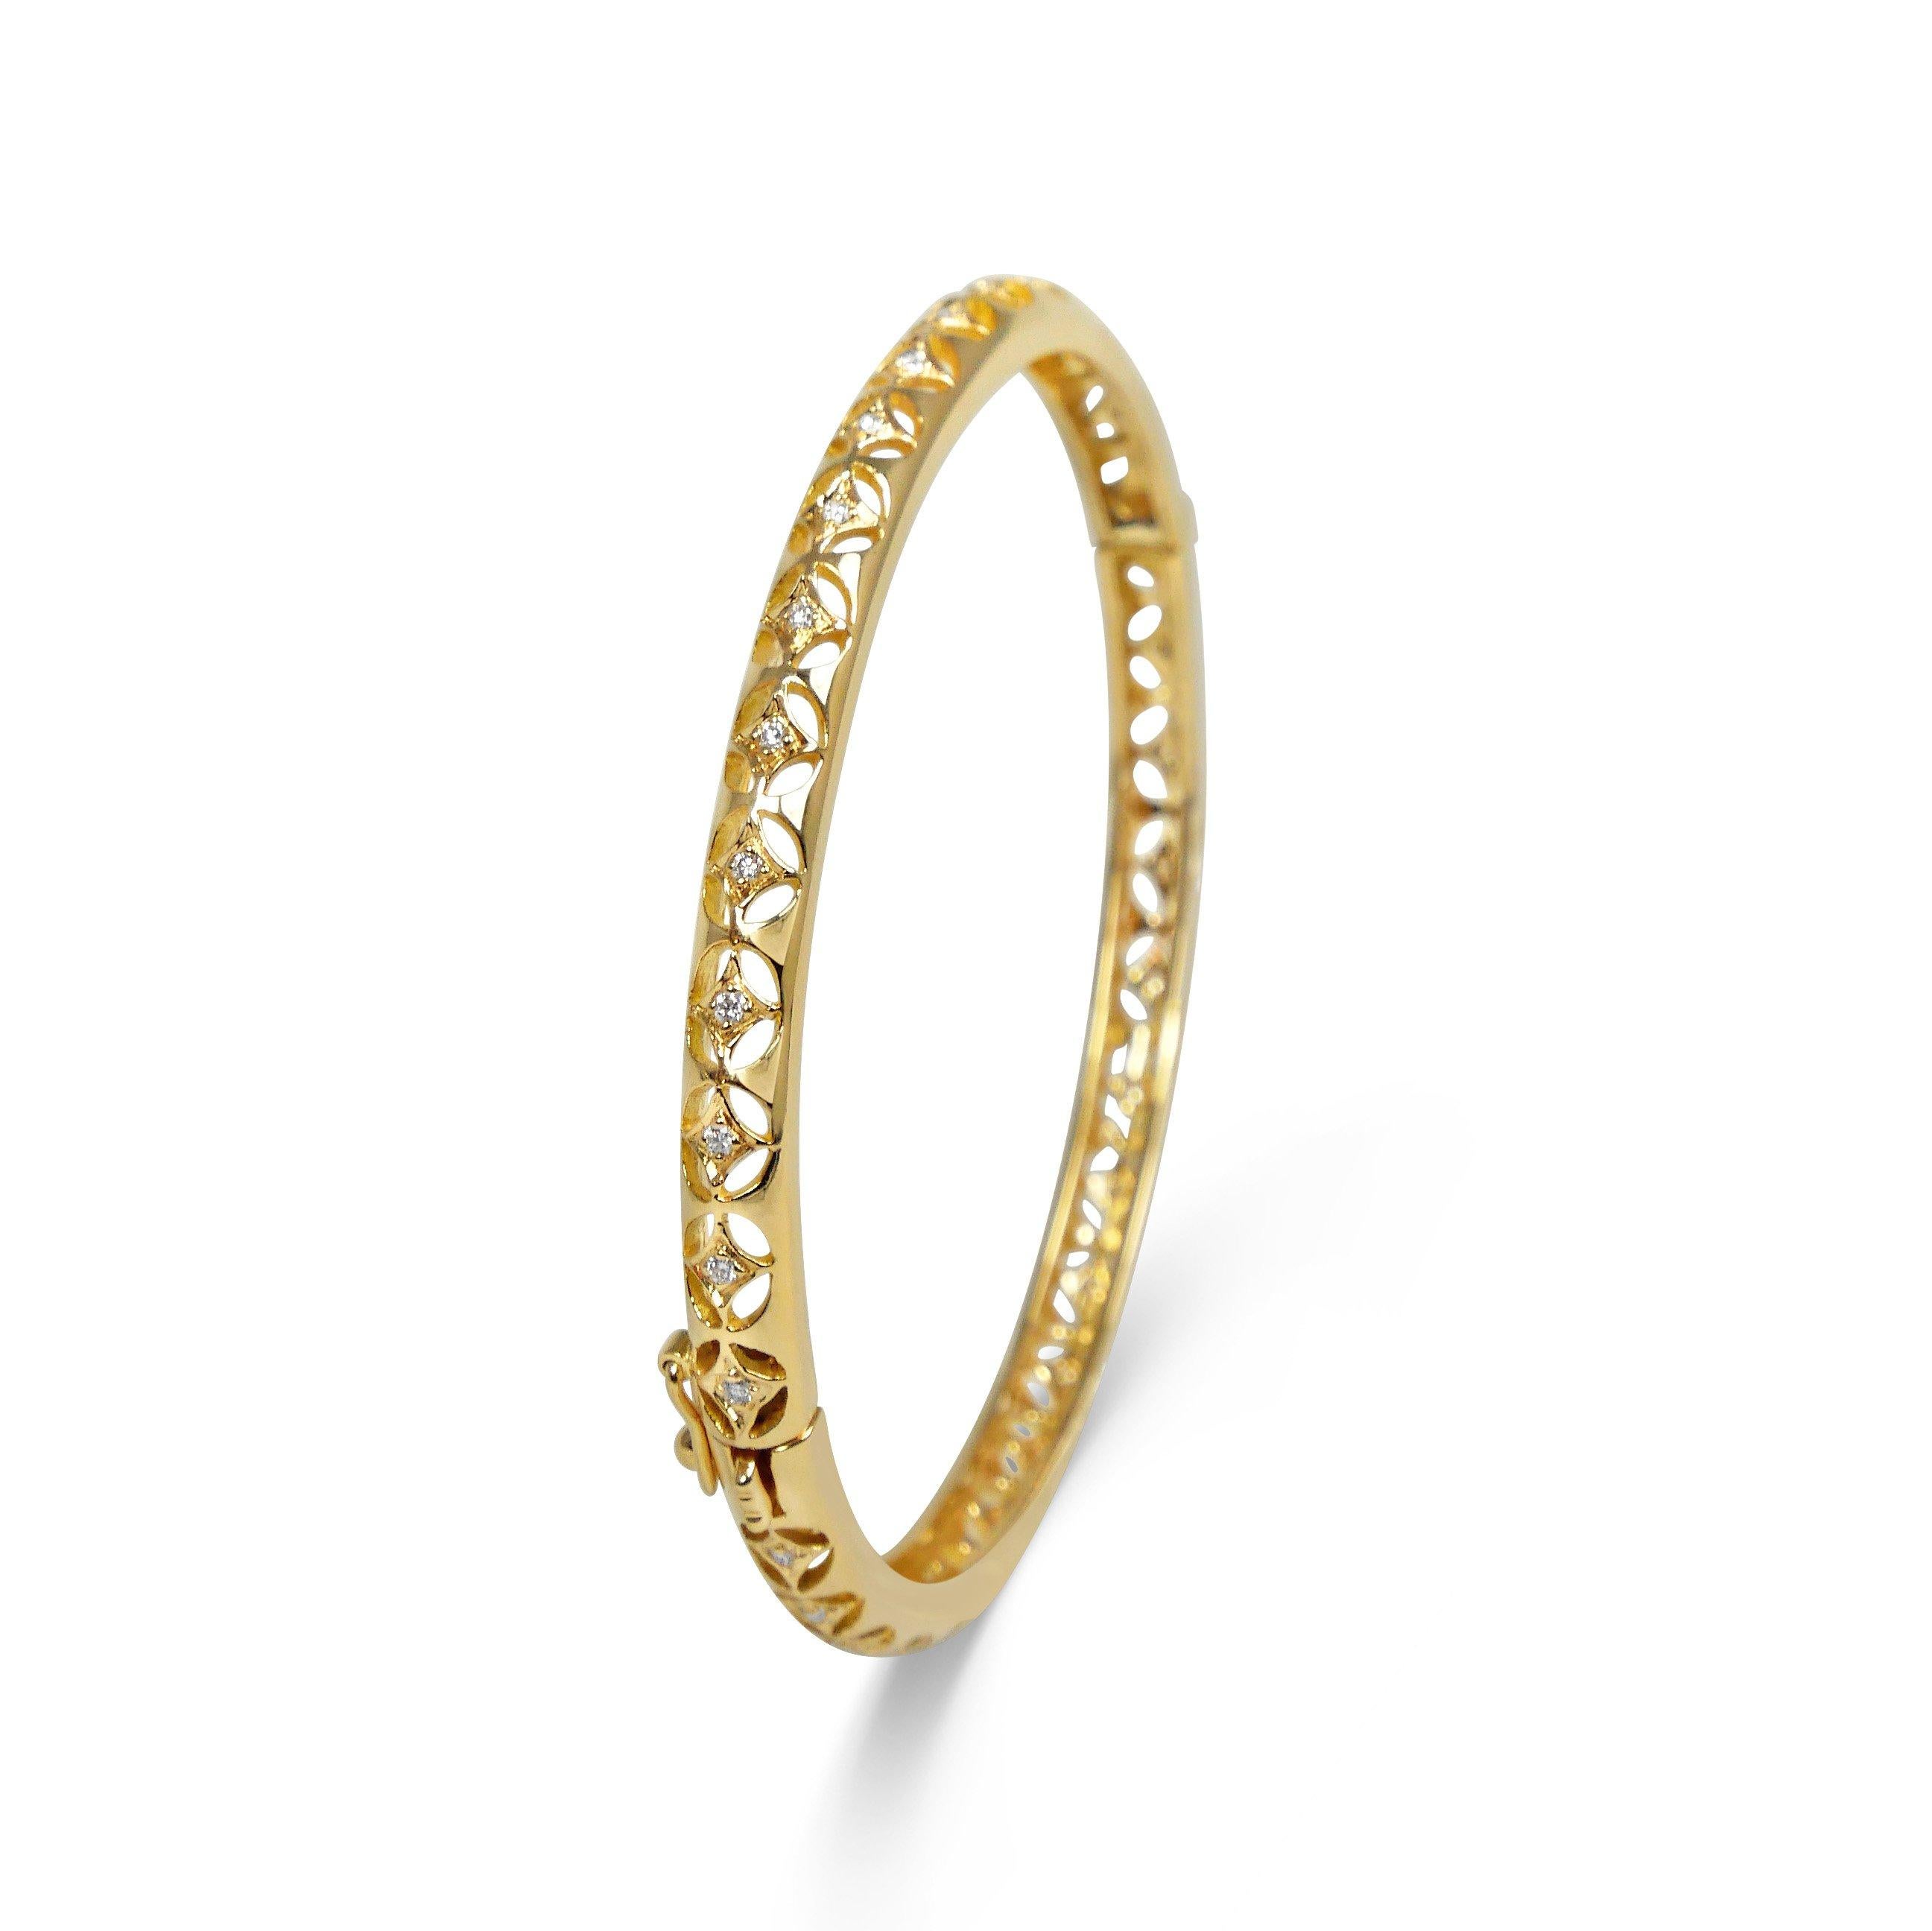 Delicate hand pierced 18k yellow gold and white diamonds lace bangle bracelet. Can be worn both with a casual outfit for an every day look or with a more elegant outfit. Showcasing our designer's signature 18K gold lace, inspired by her childhood